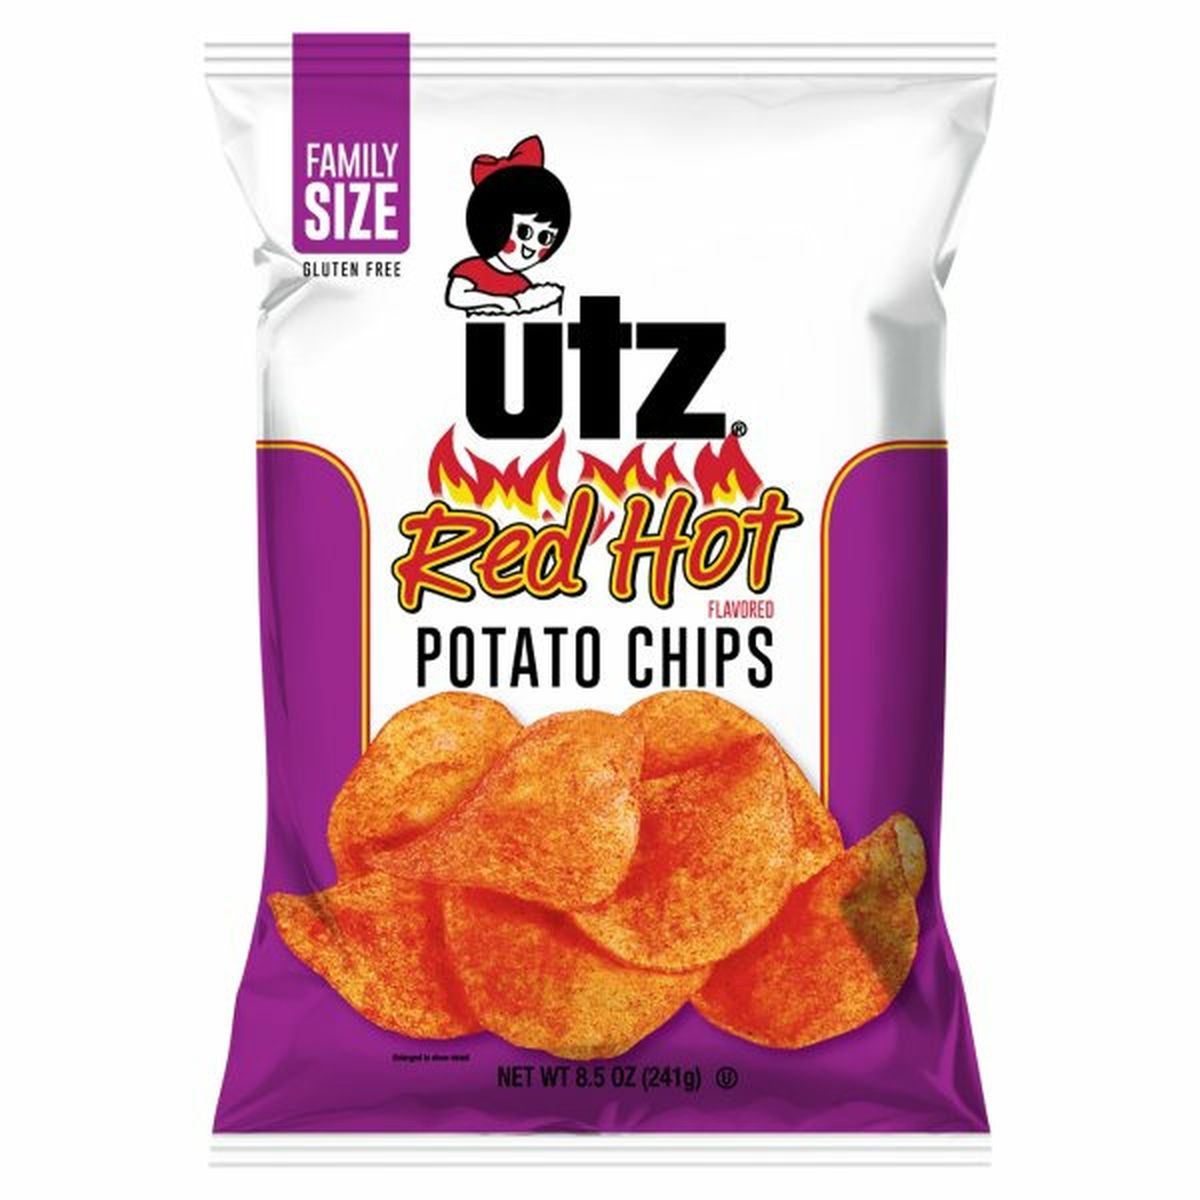 Calories in Utz Potato Chips, Red Hot Flavored, Family Size